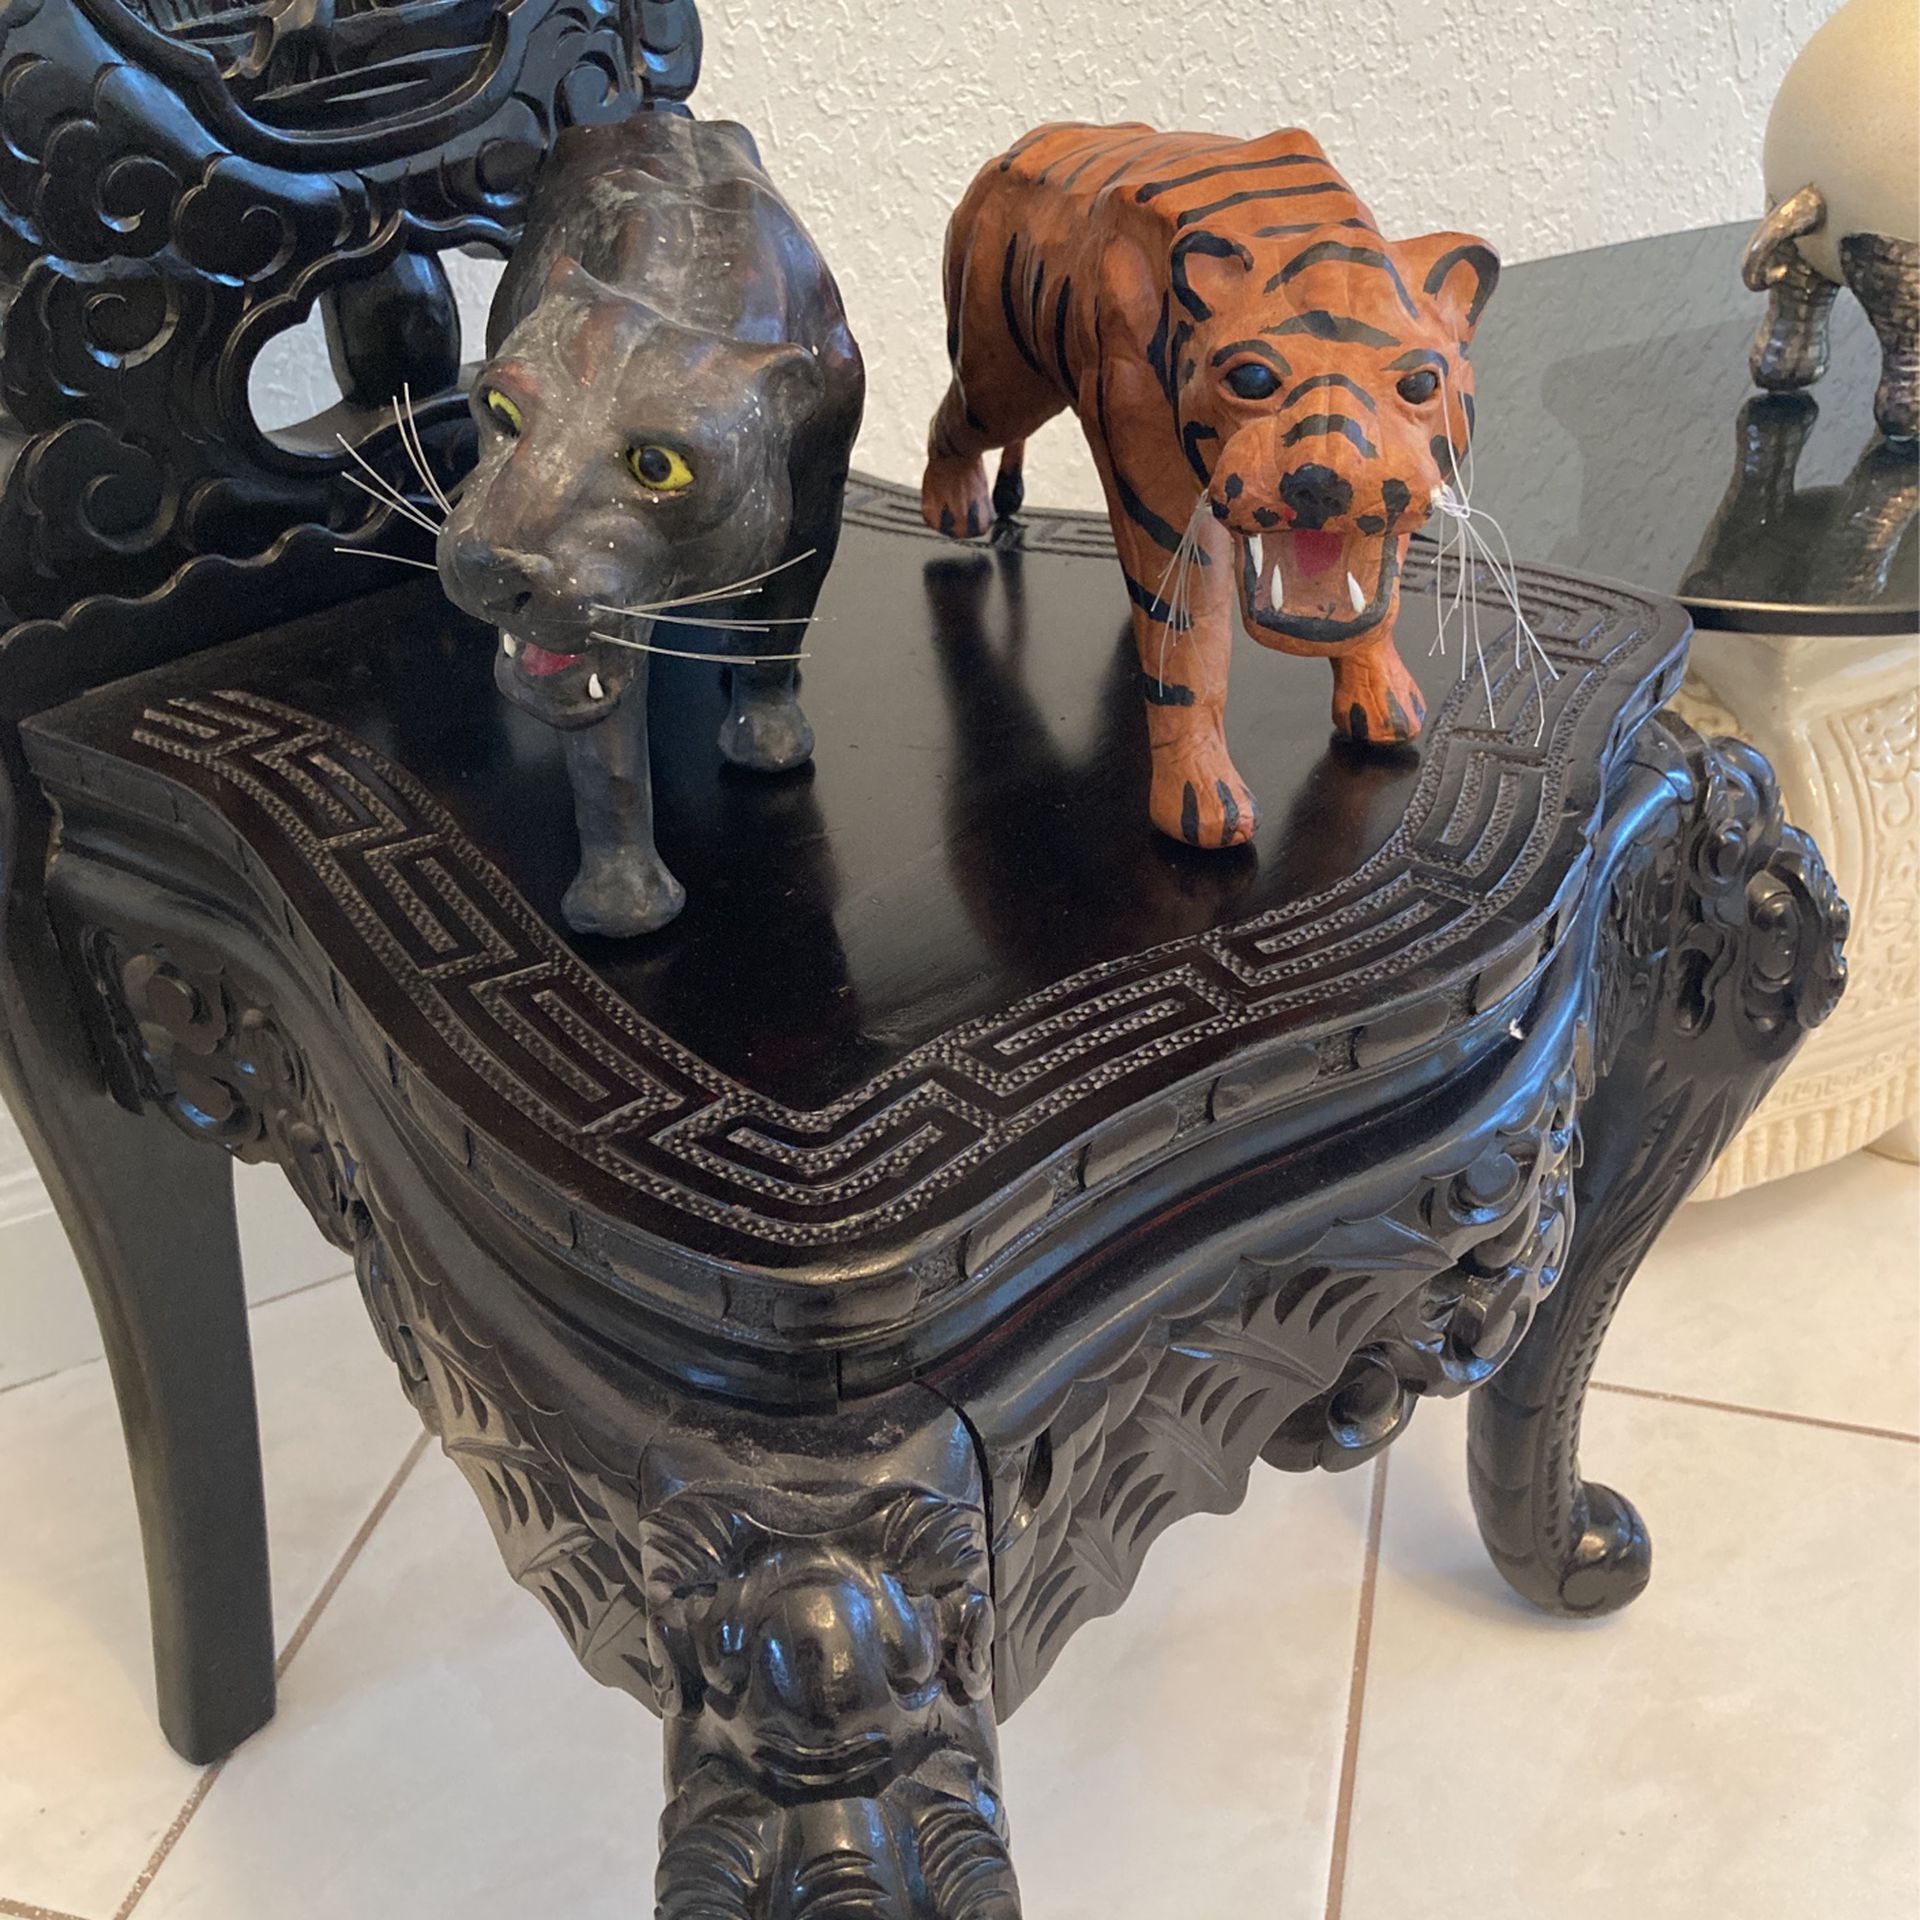 $50 For 2!   Black Panther Statue & Tiger Statue. 2 Leather Animal Statues Just $50 For Both!